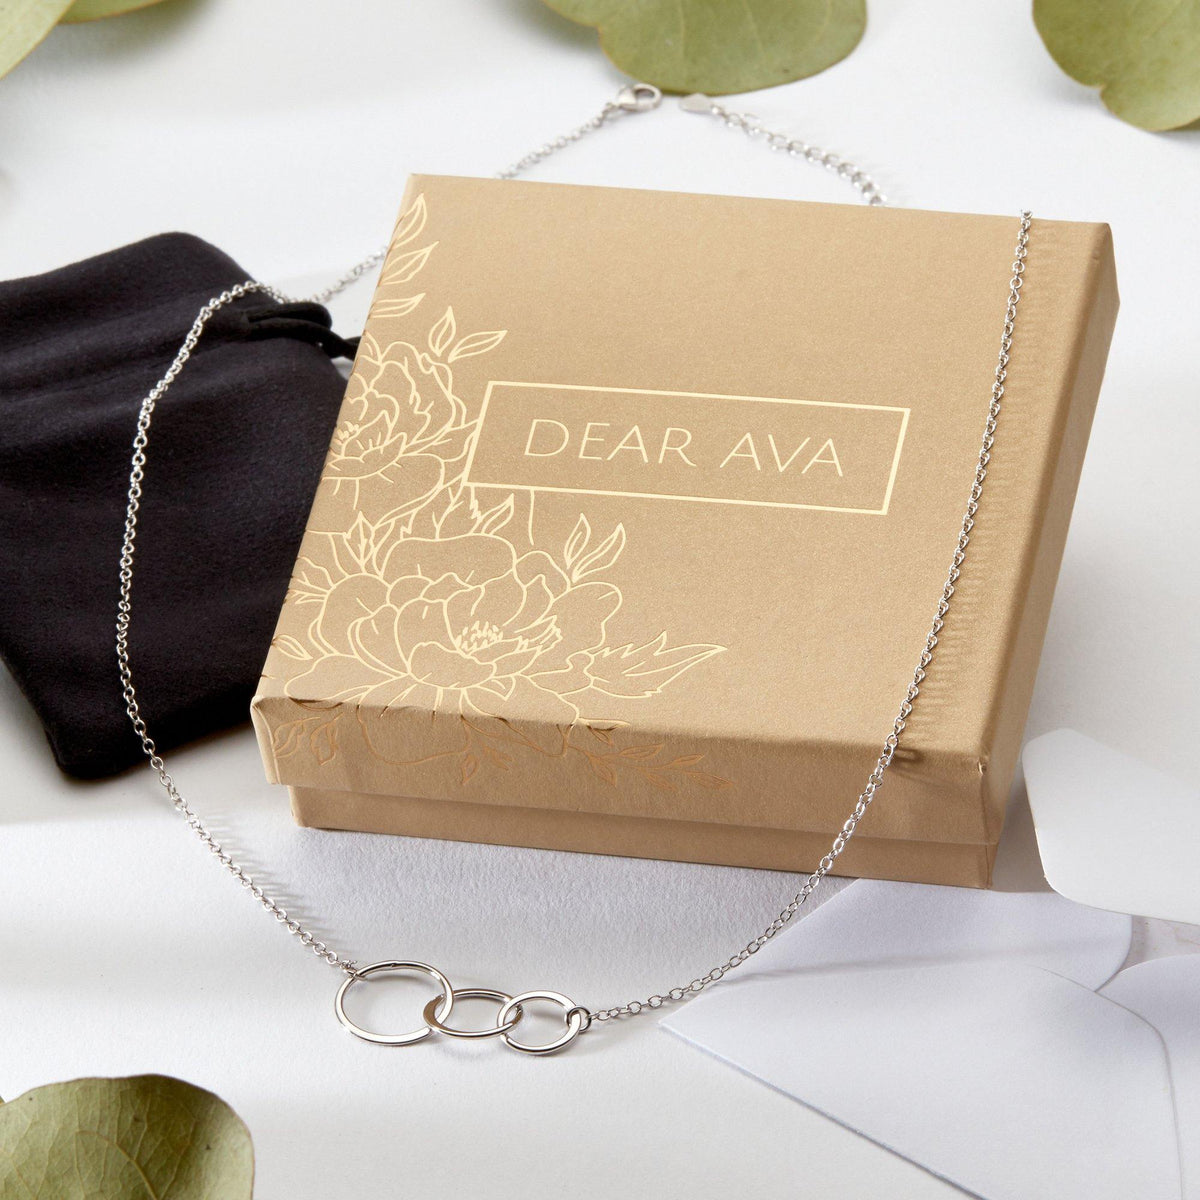 Christmas Gift Necklace - Dear Ava, Jewelry / Necklaces / Pendants